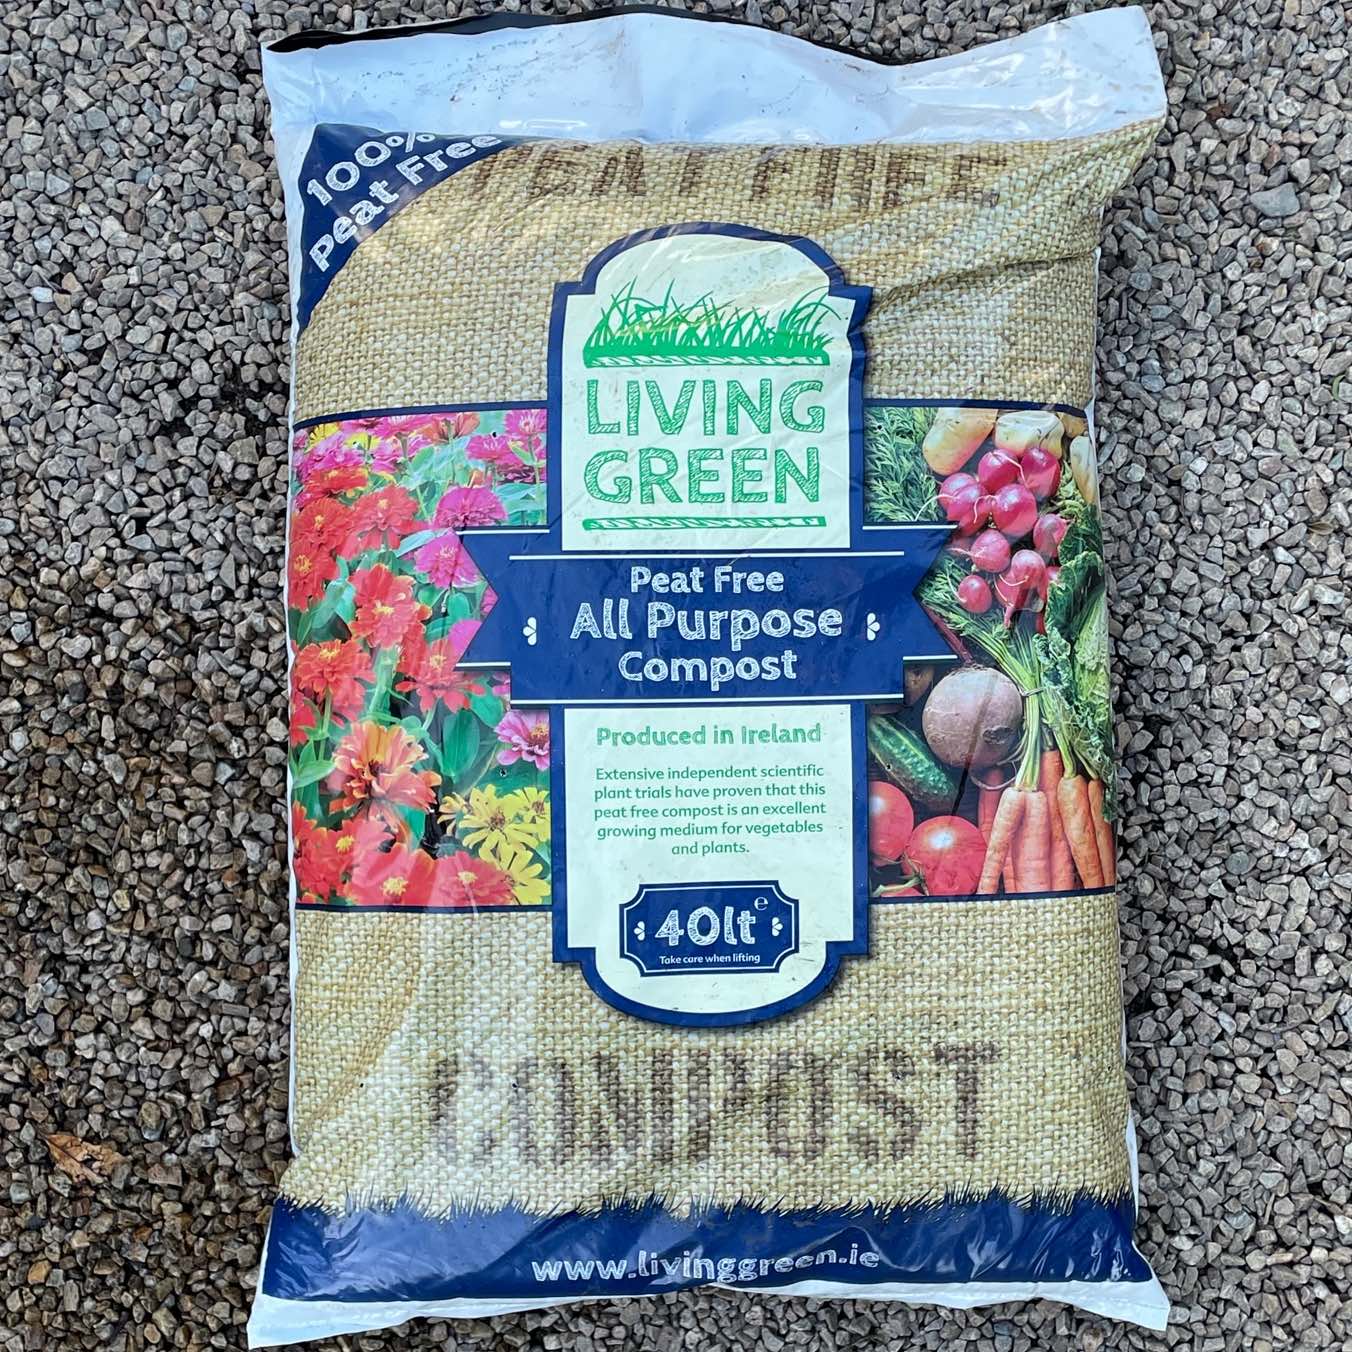 'Living Green' certified organic peat-free compost (6 x 40 litre bags)